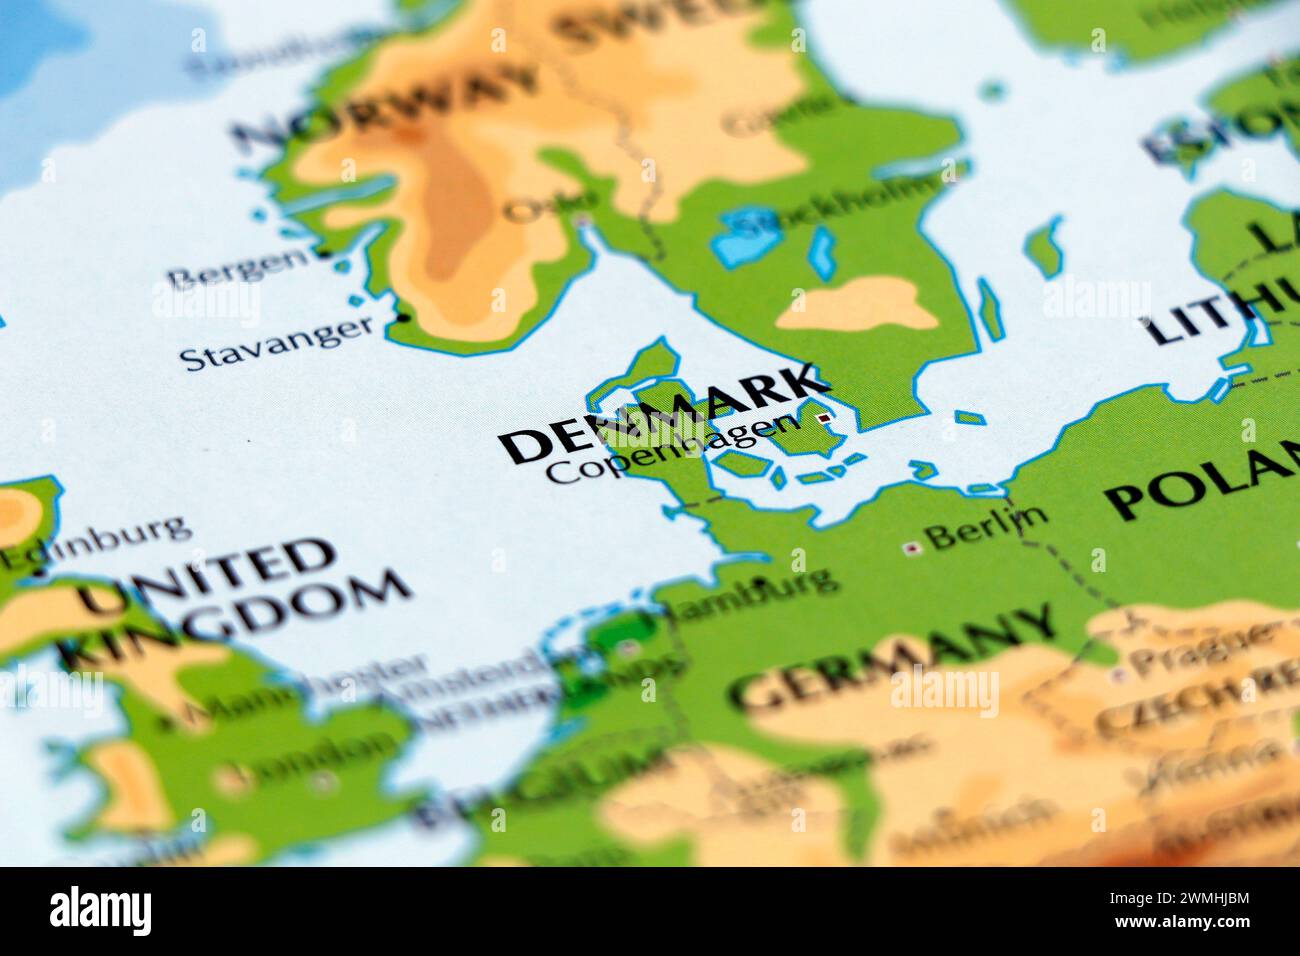 world map of europe, denmark and  bordering countries in close up Stock Photo